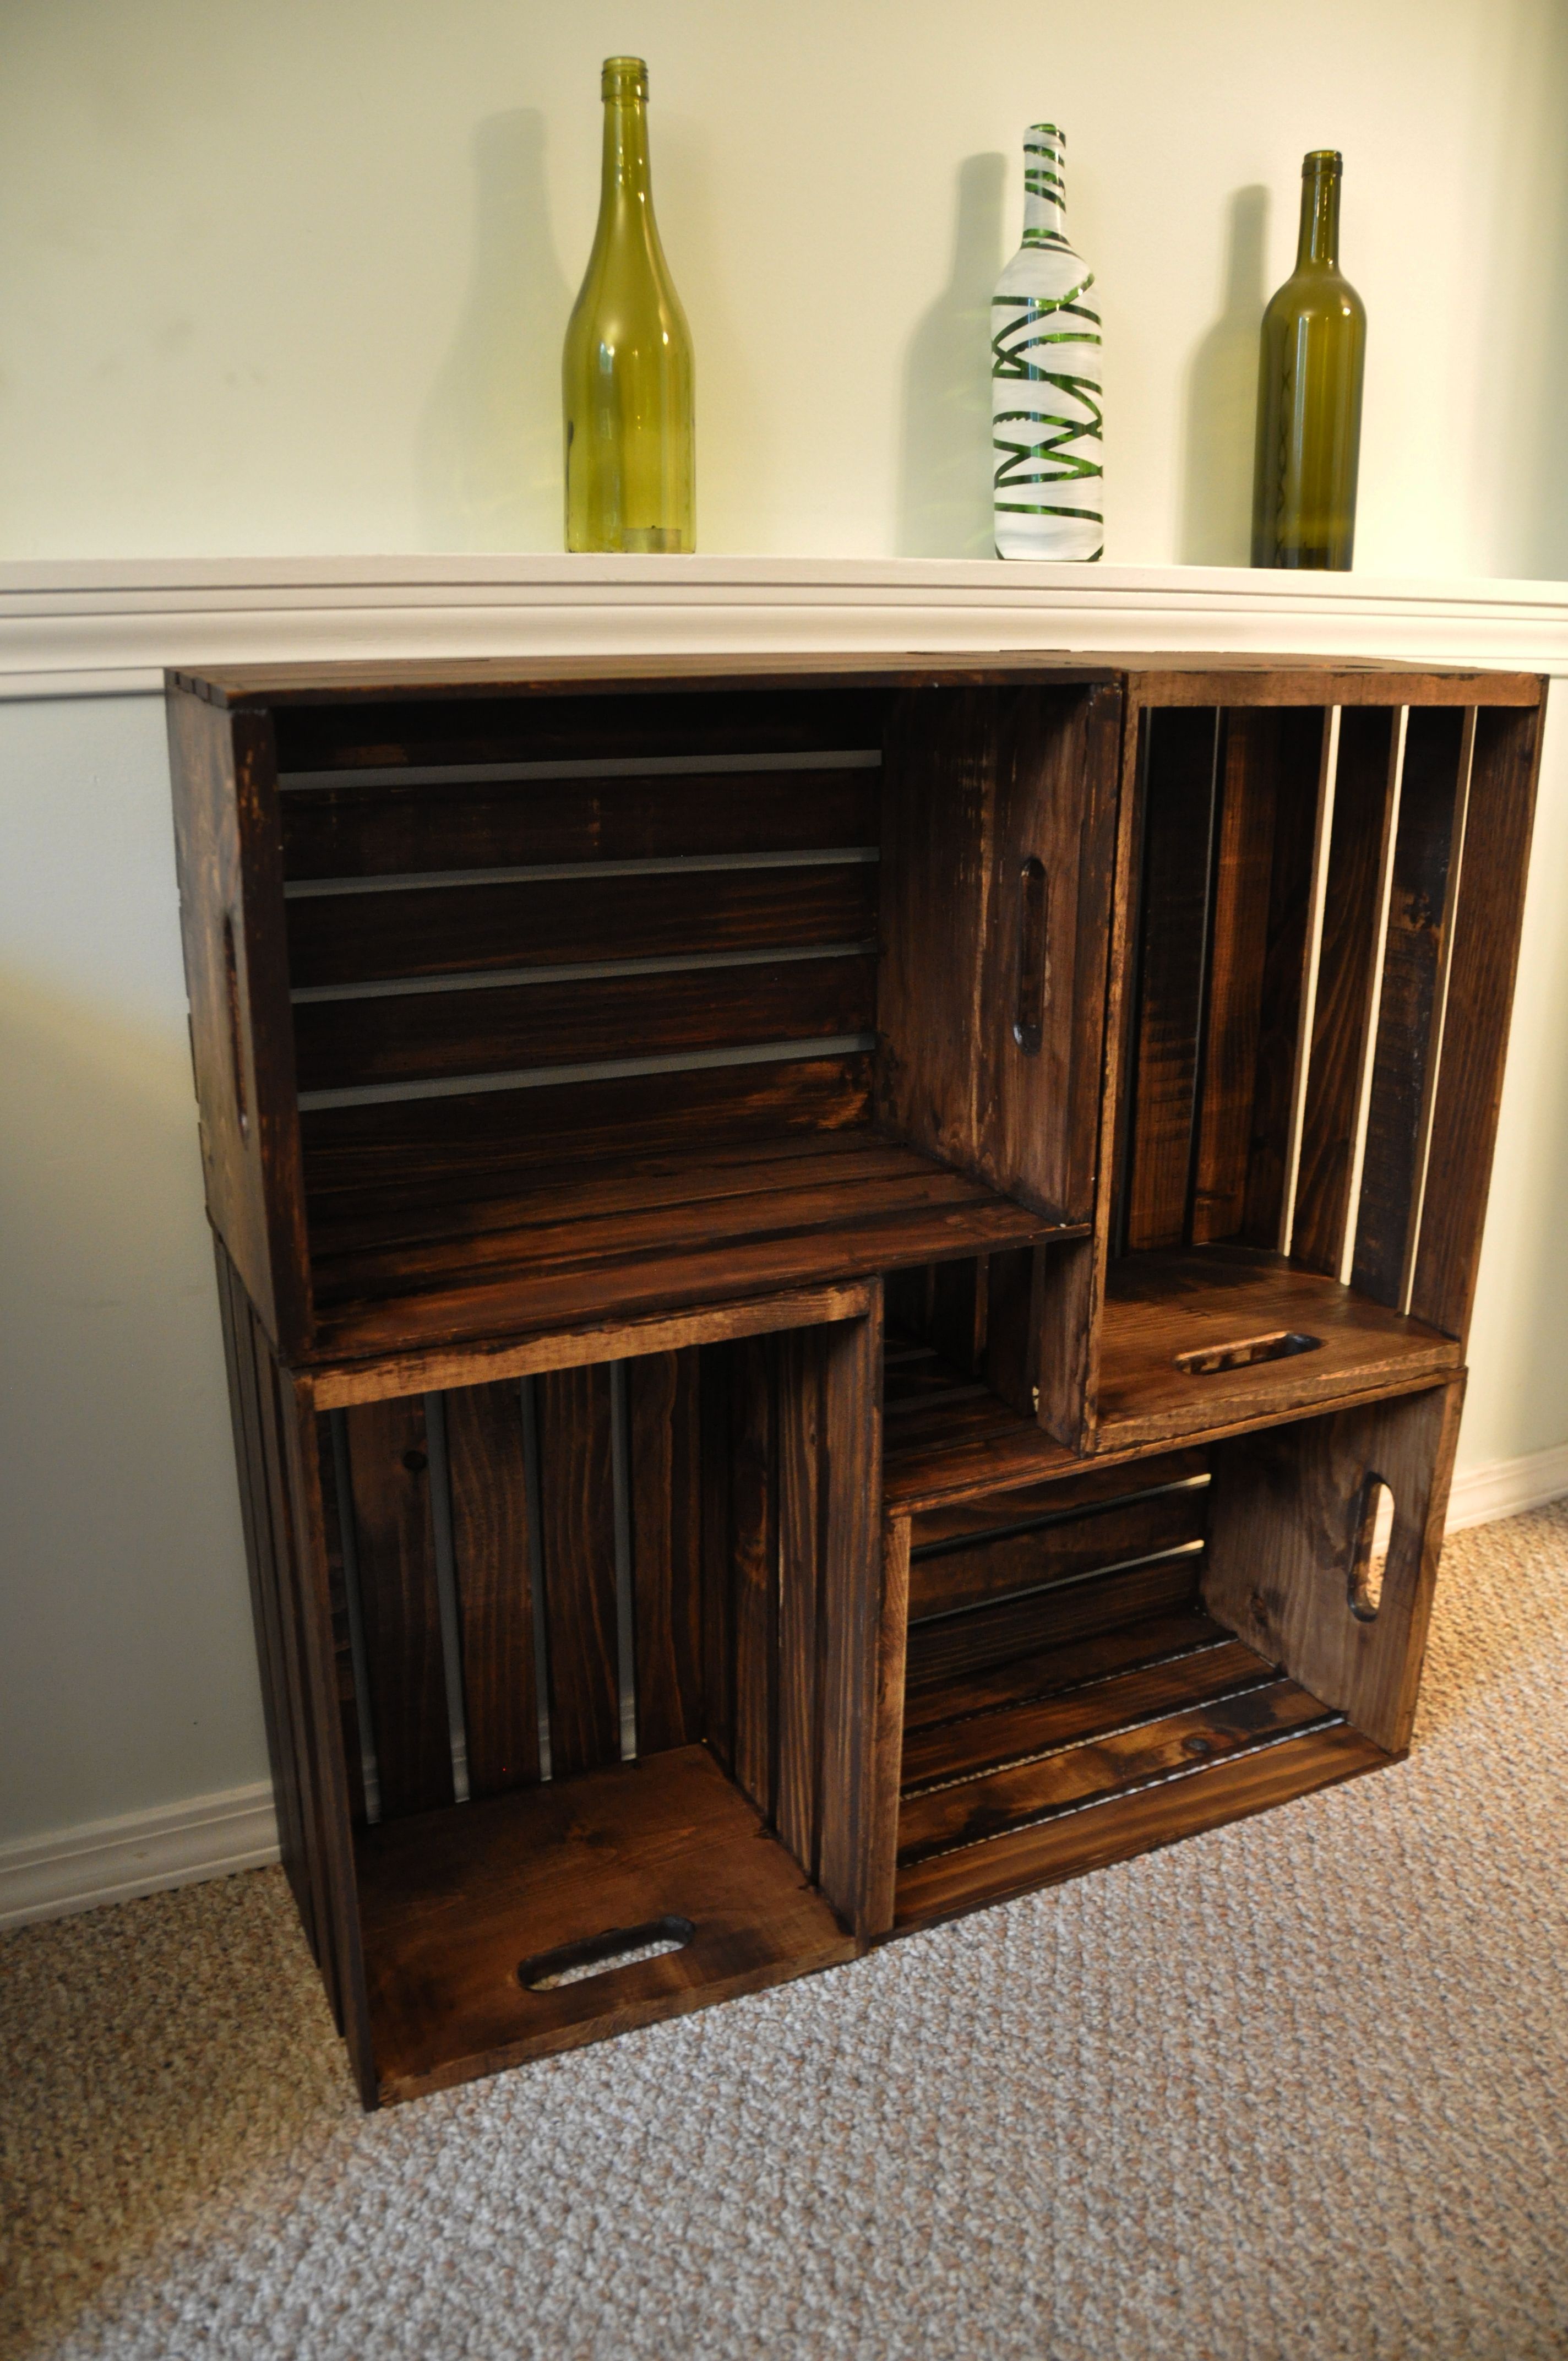 Wooden Crate Bookcase – “build” them double high and use them in the living room for books and knick knacks.